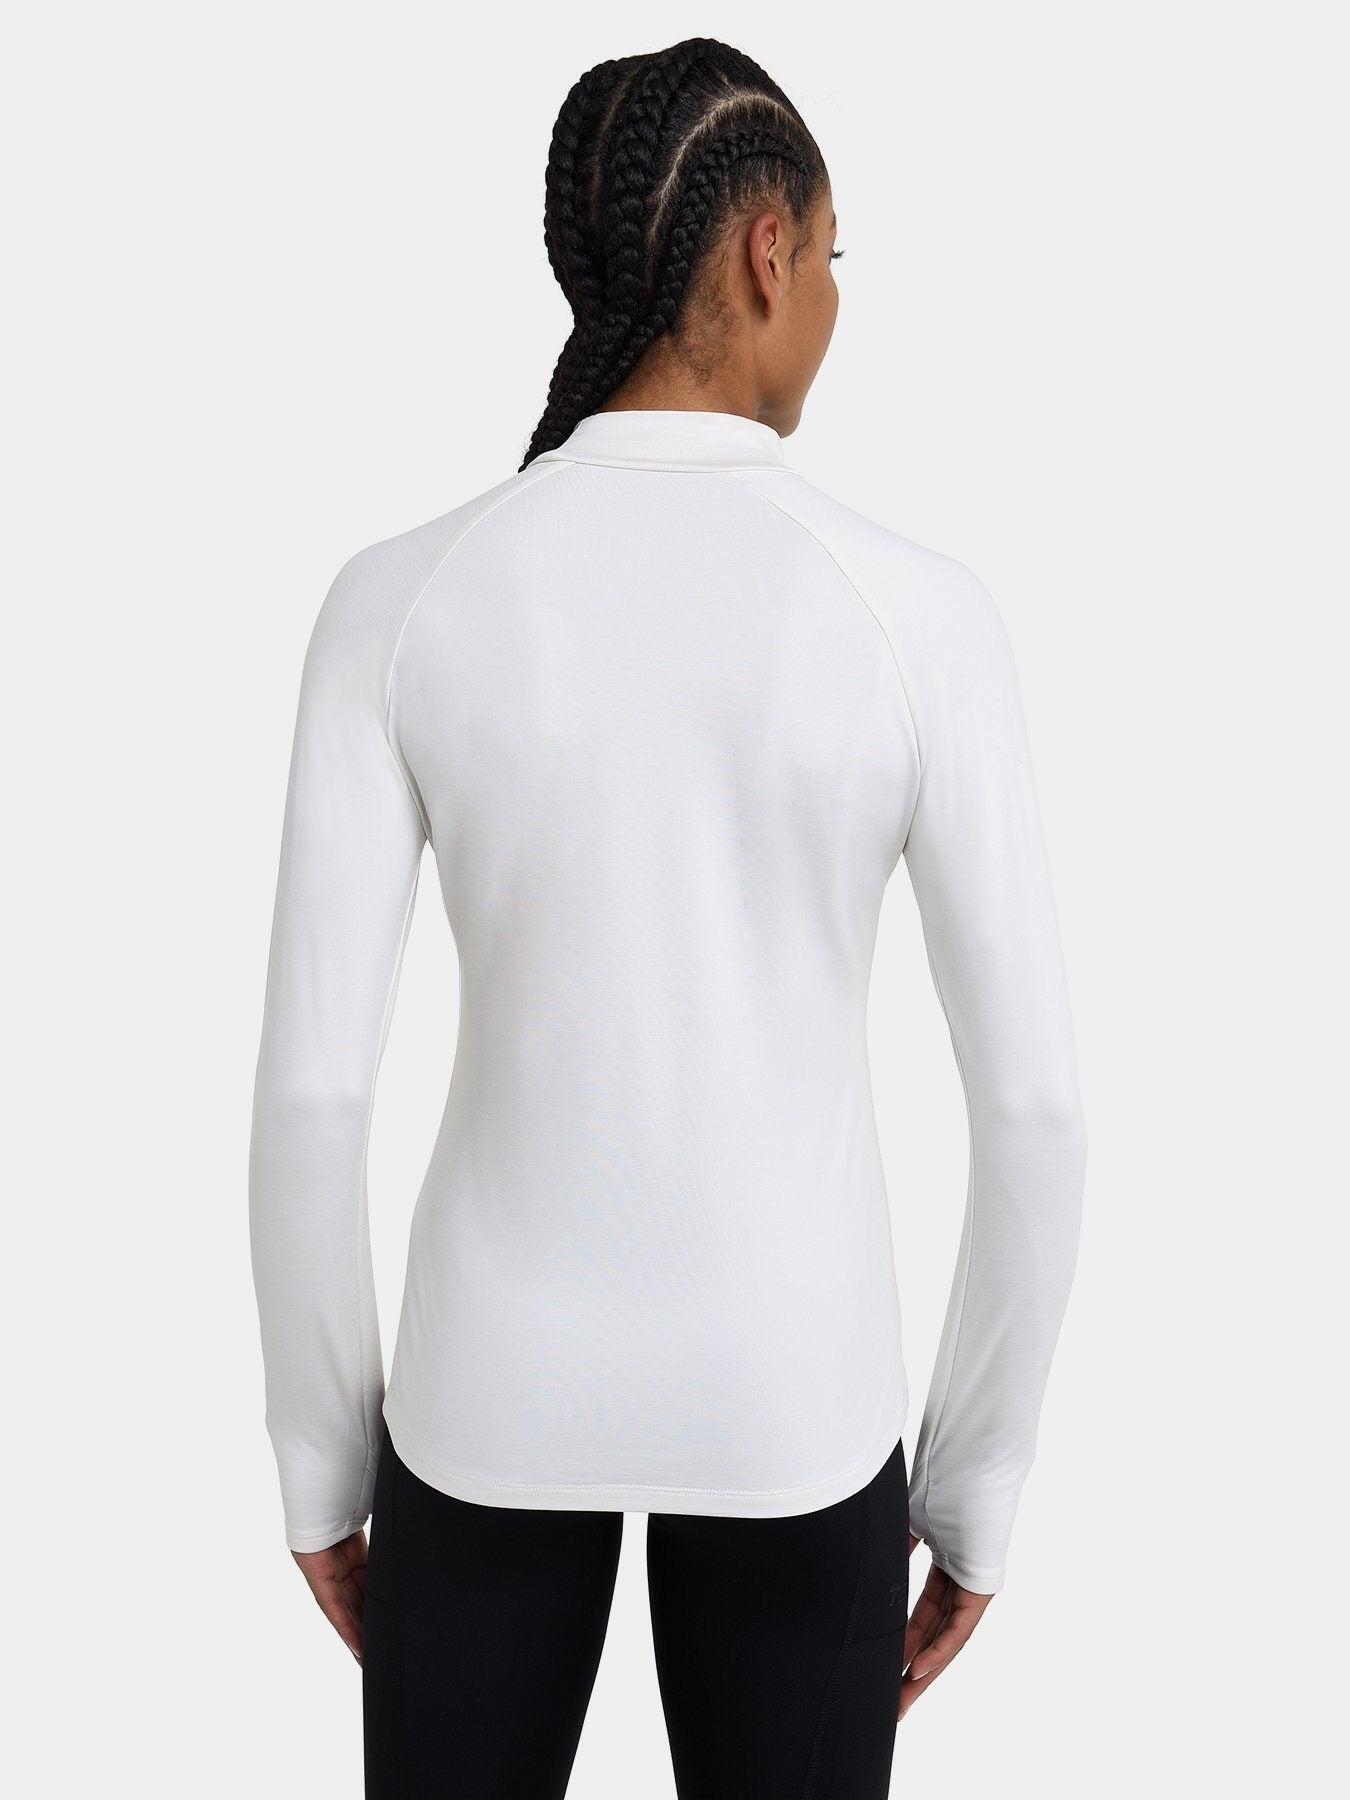 Women's Super Thermal Base Layer Top - Mock Neck - Marshmallow 2/5